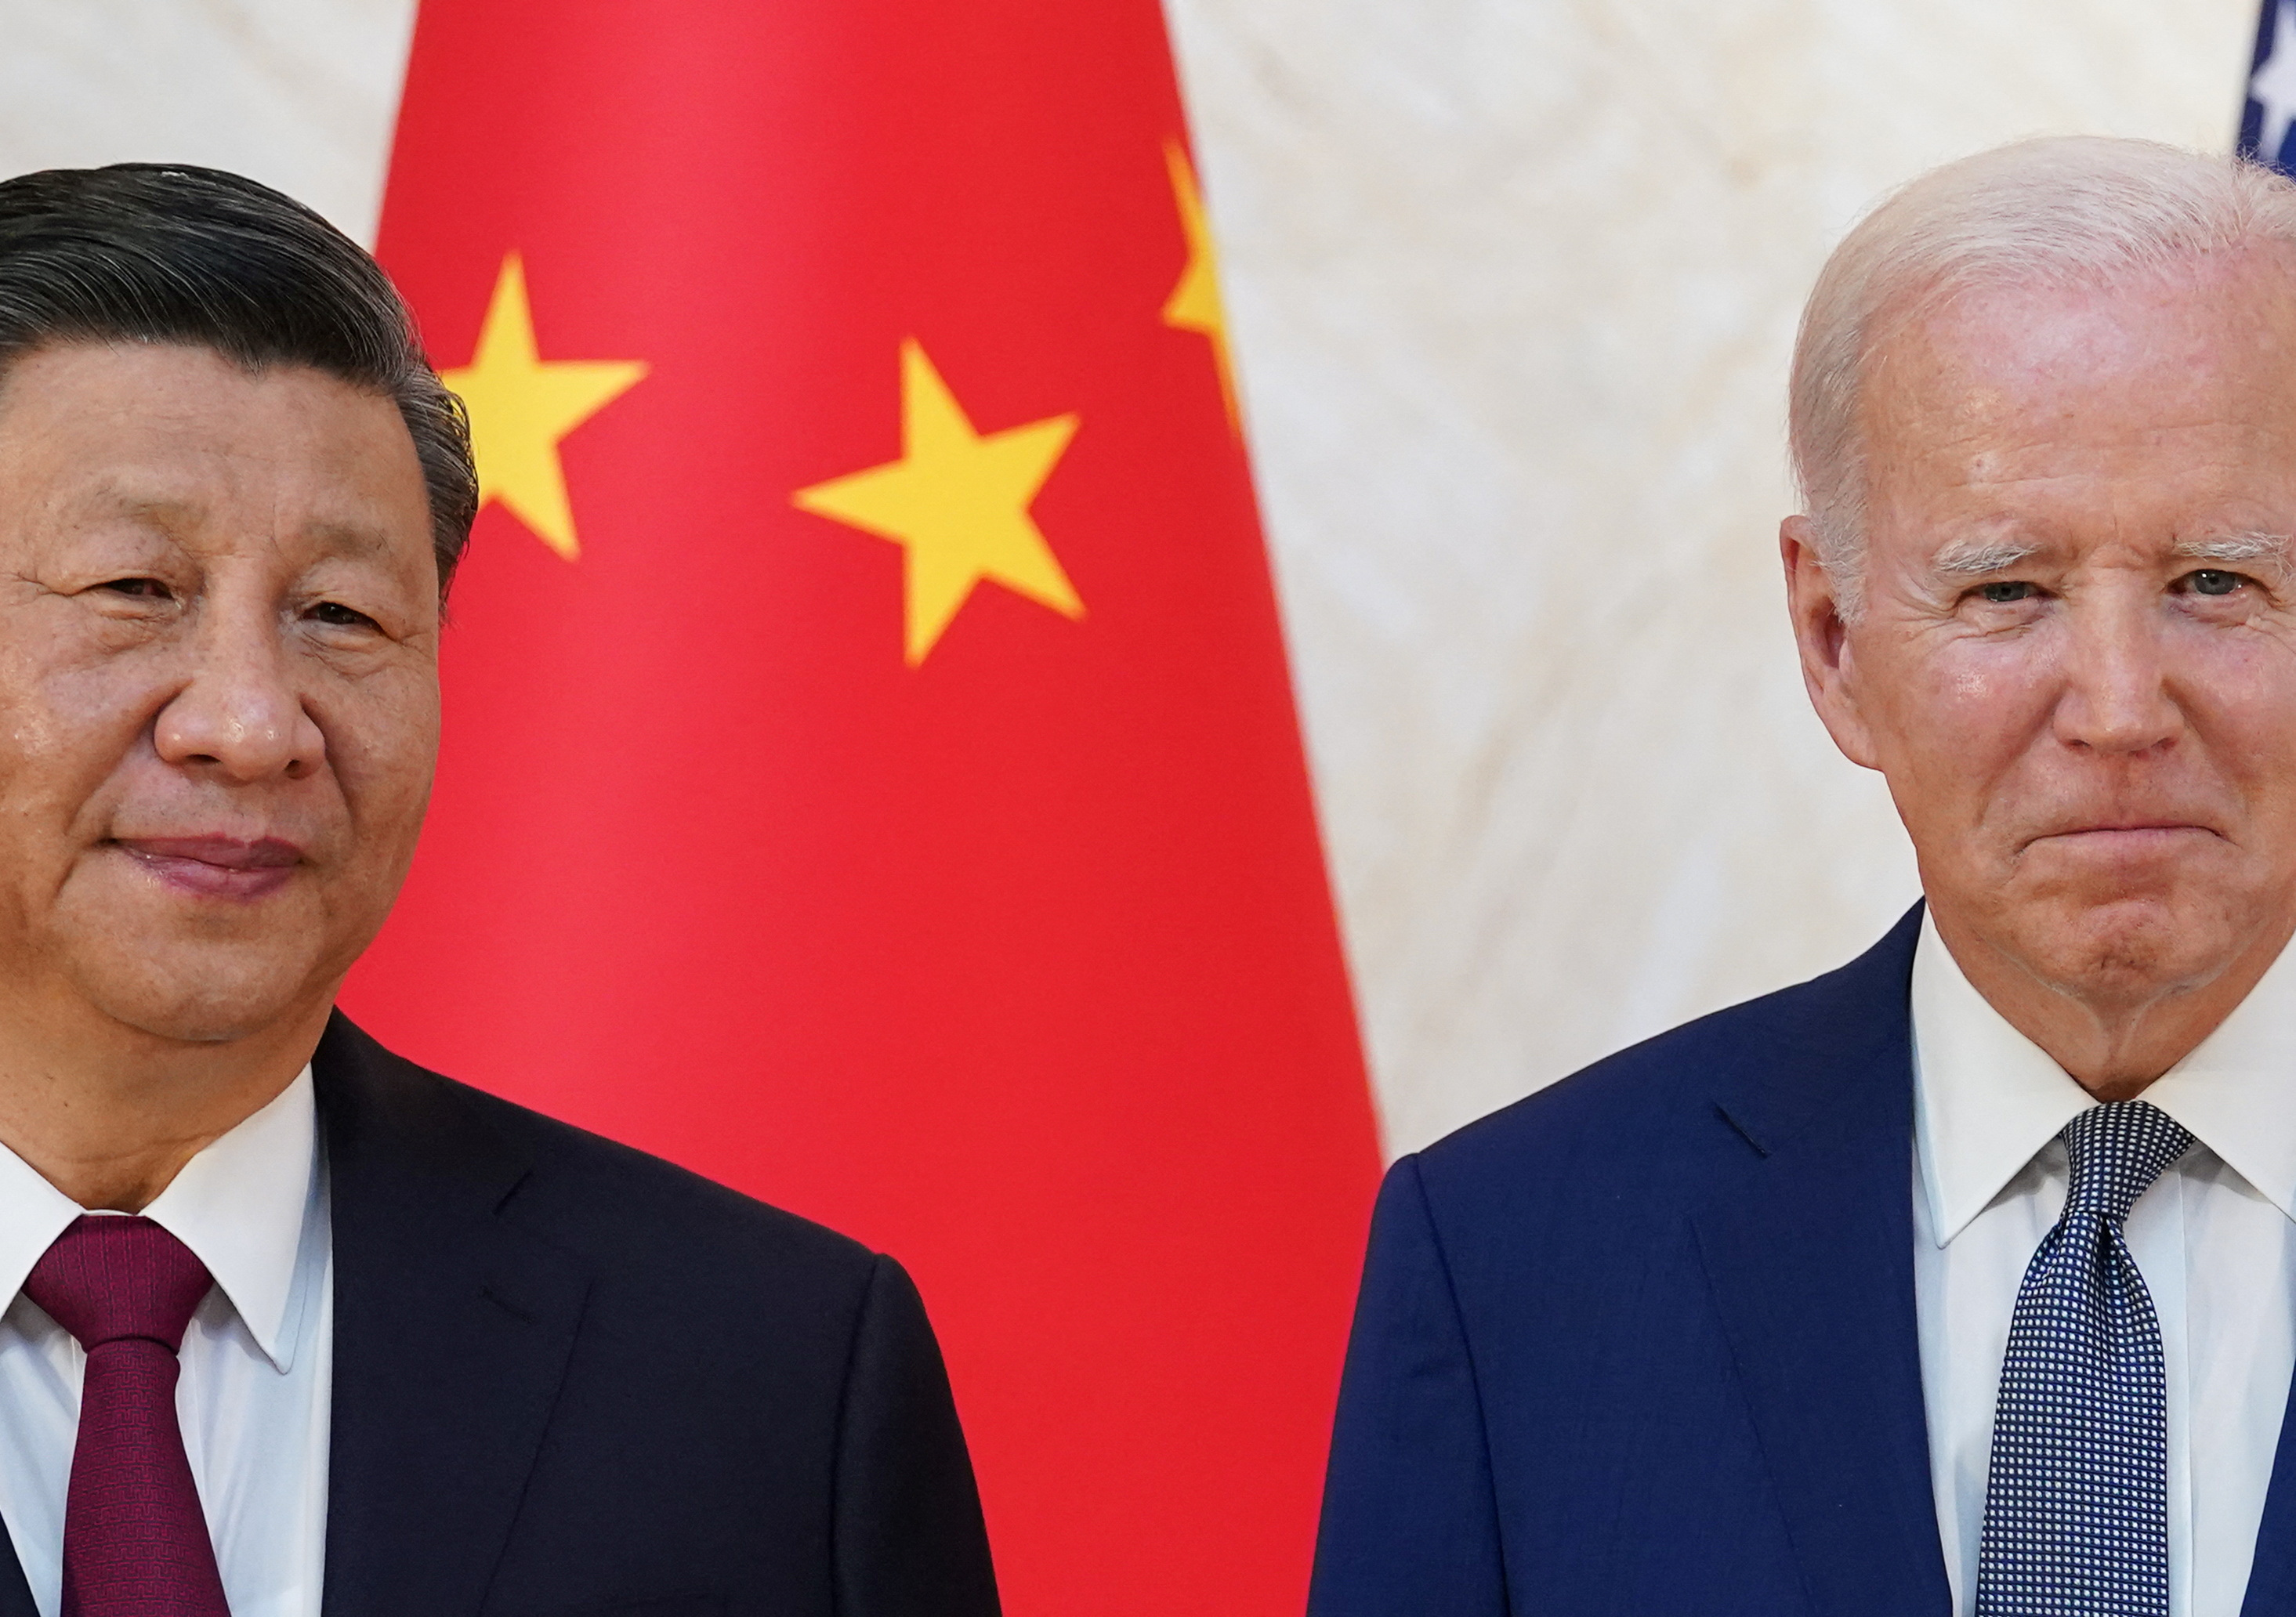 U.S. President Joe Biden meets with Chinese President Xi Jinping at the G20 in Bali